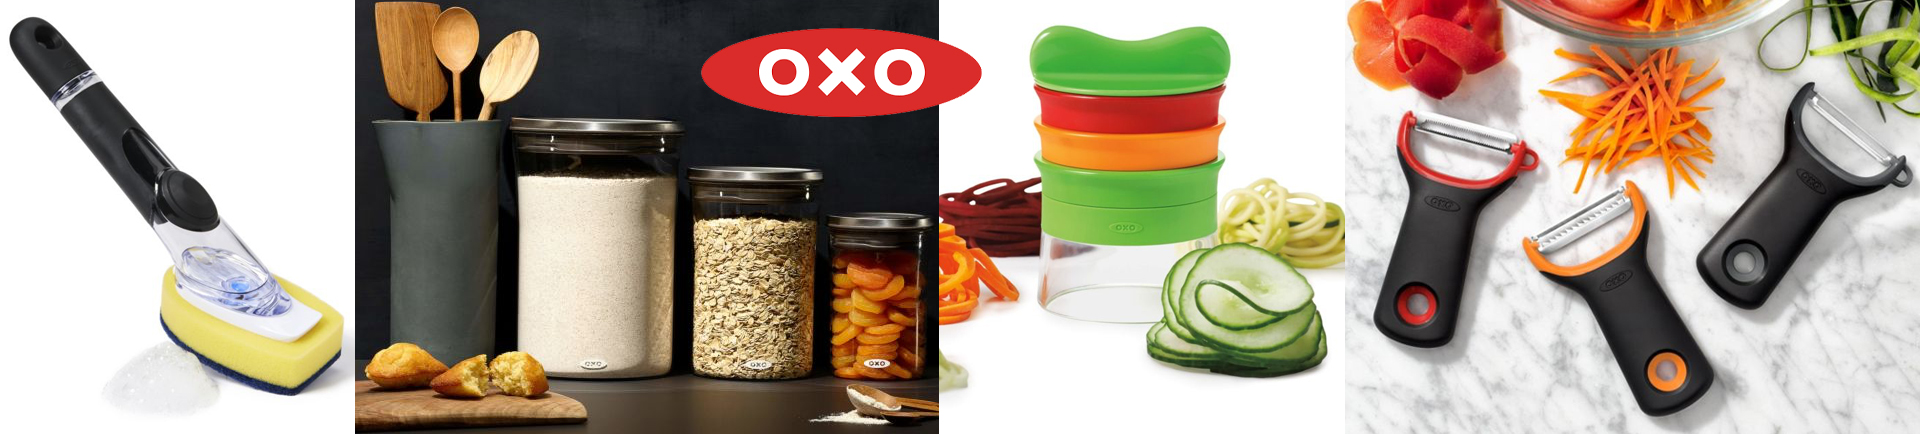 OXO Good Grips Silicone Pot Holder - Seltzer - Spoons N Spice